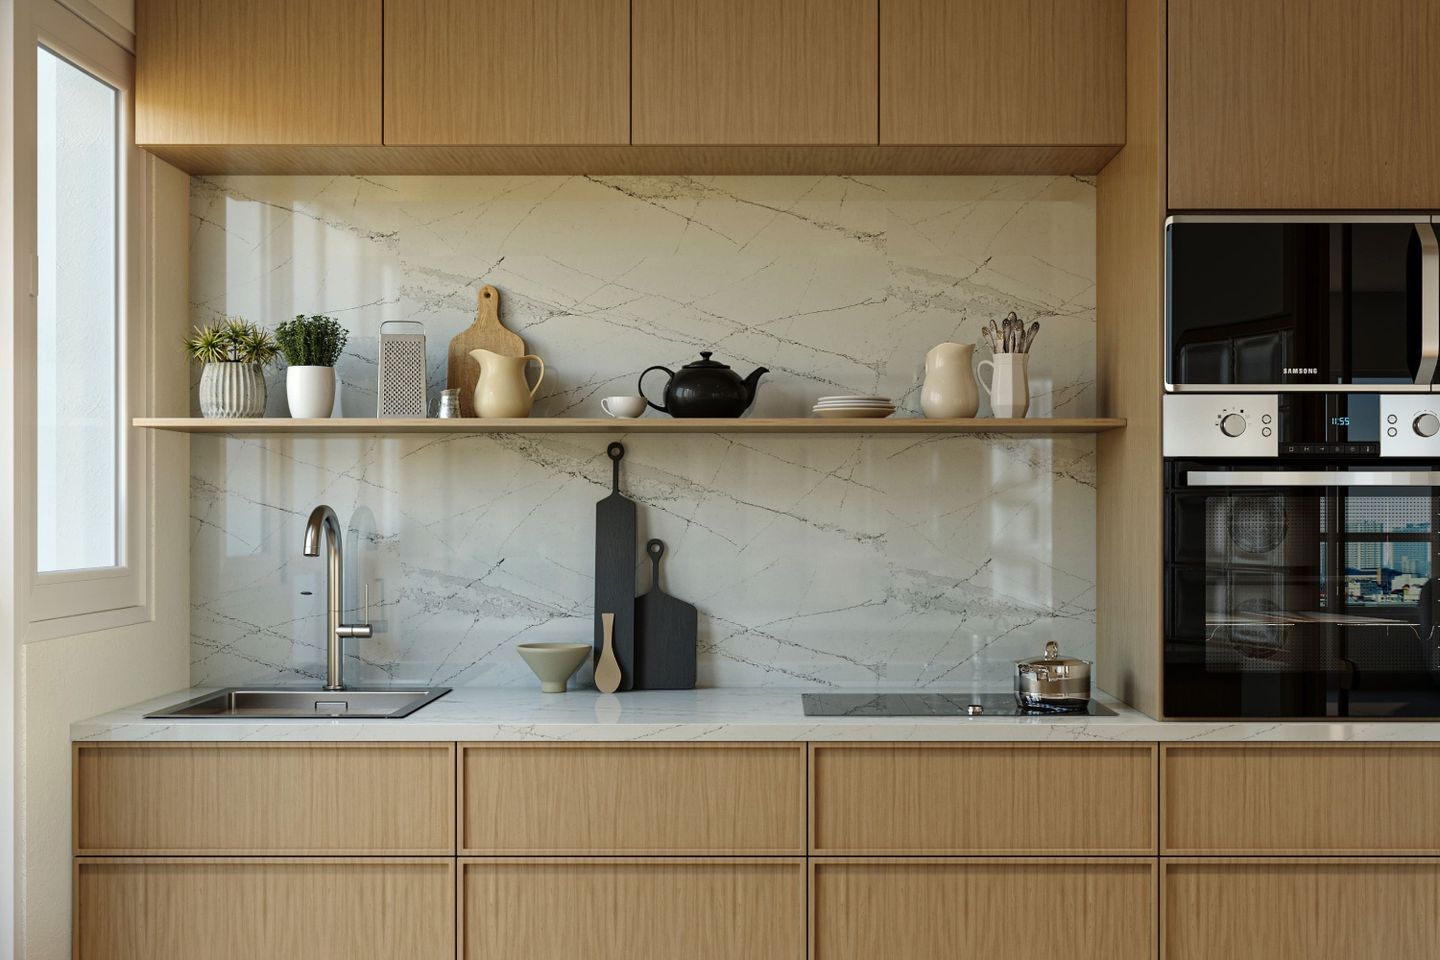 Glossy White Kitchen Dado Tiles With A Marble-Like Finish - Livspace